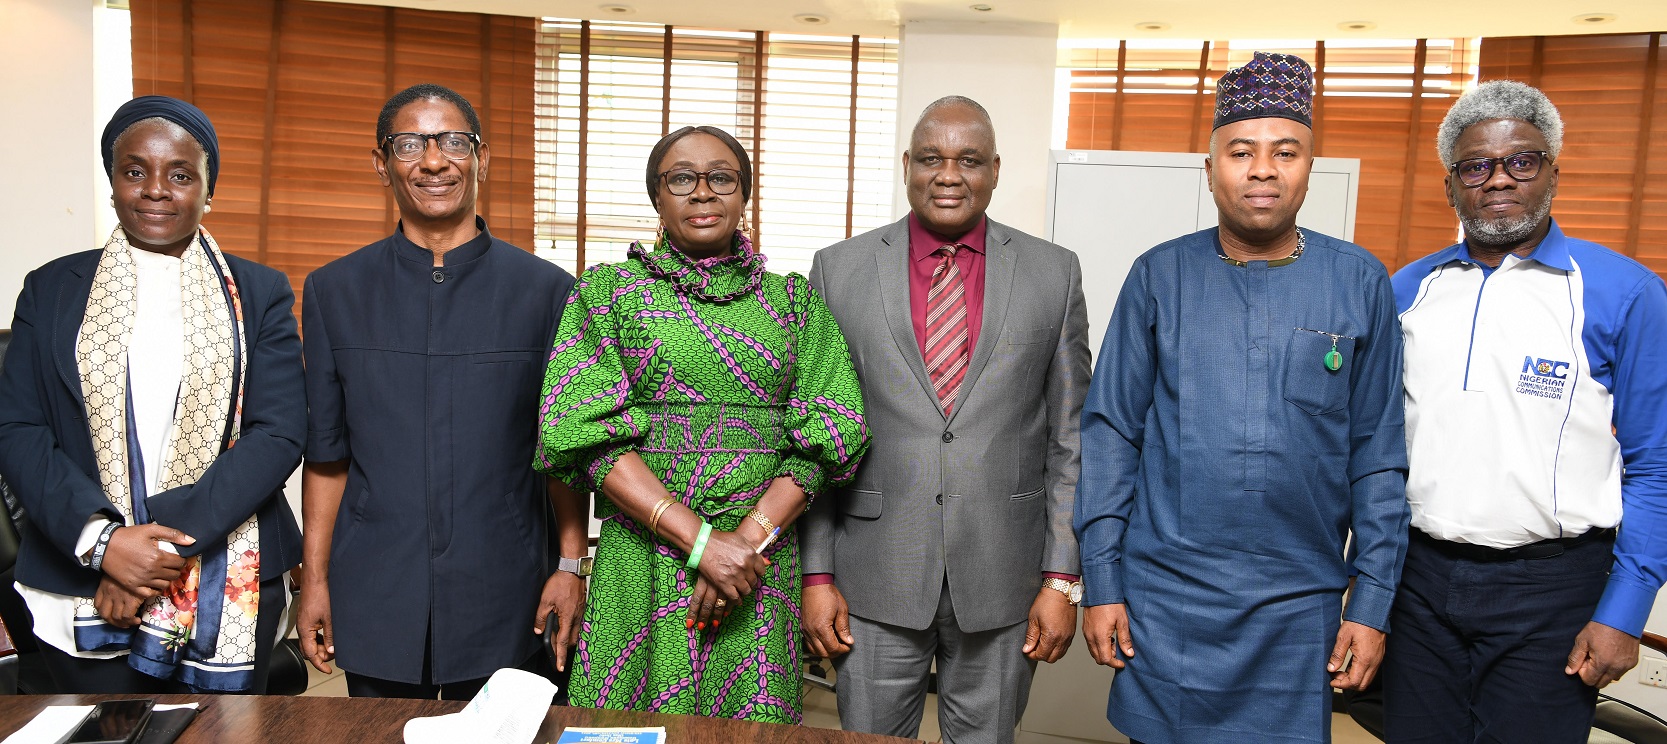 L - R: Nafisa Rugga, Head, Digital Media, Nigerian Communications Commission (NCC); Oscar Kalu, Director, Programmes and Organisation, National Civil Society Council of Nigeria (NCSCN); Nnena Ukoha, Head, Corporate Communications, NCC; Reuben Muoka, Director, Public Affairs, NCC; Amb. Blessing Akinlosotu, Executive Director, NCSCN and Dr. Omoniyi Ibietan, Head, Media Relations, NCC, during a courtesy visit by the NCSCN to the Commission to seek areas of collaboration in Abuja recently.